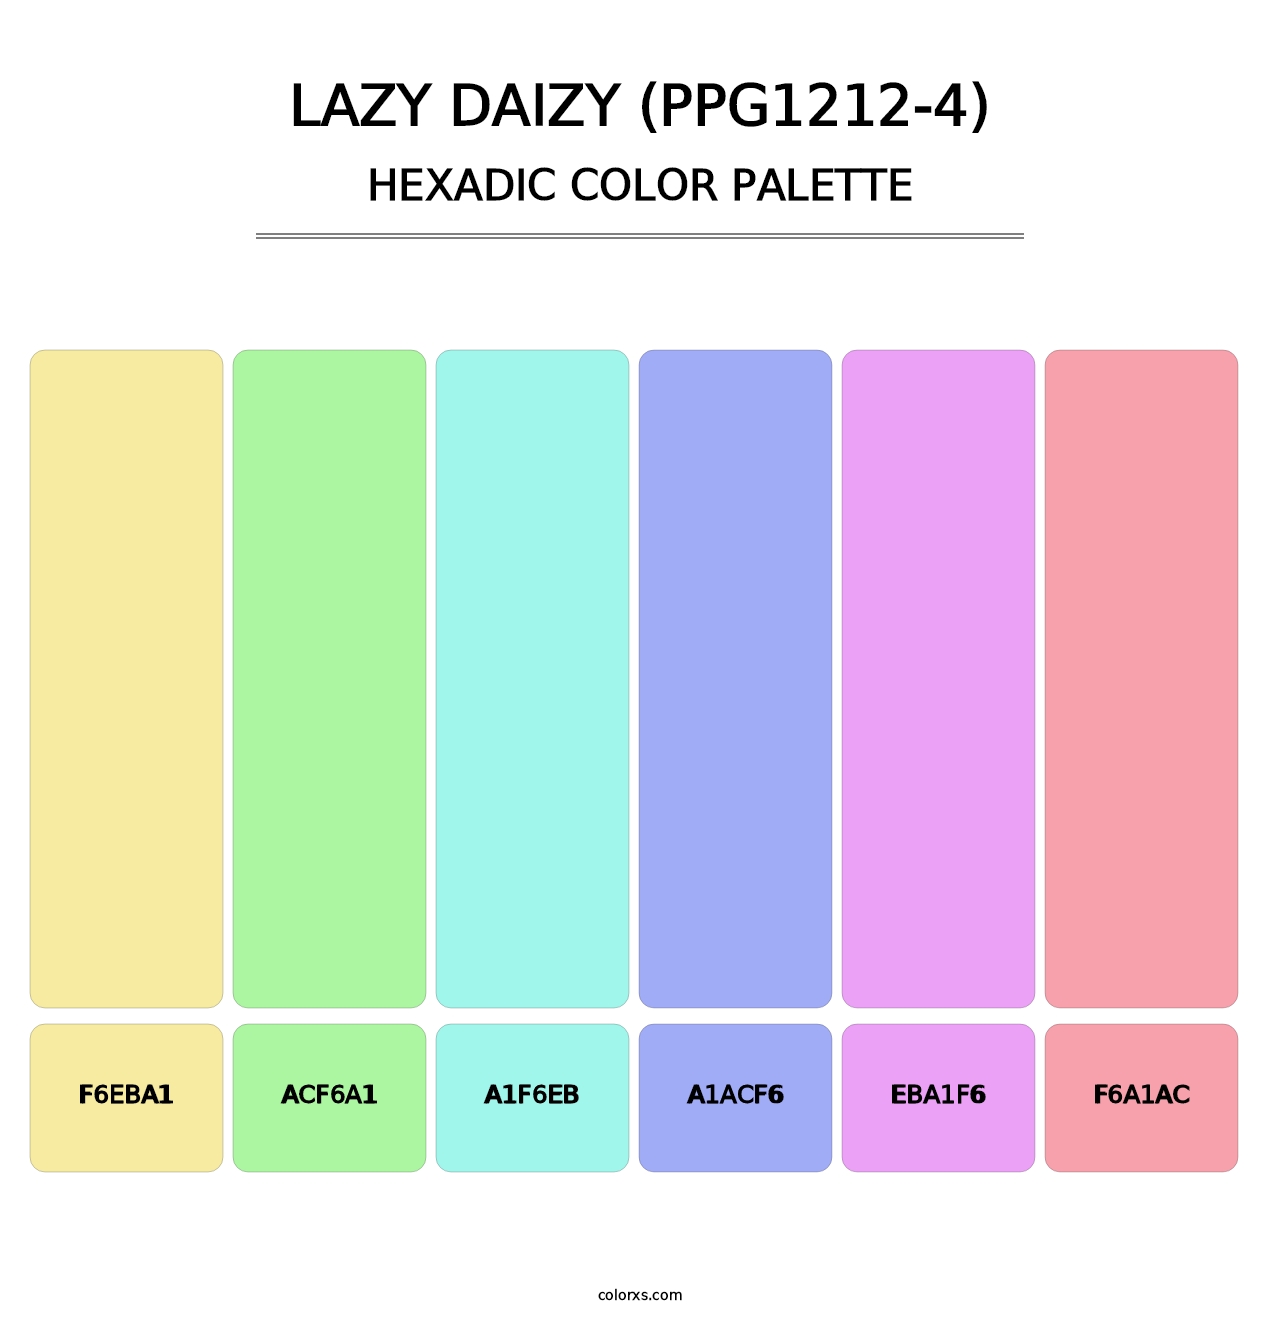 Lazy Daizy (PPG1212-4) - Hexadic Color Palette